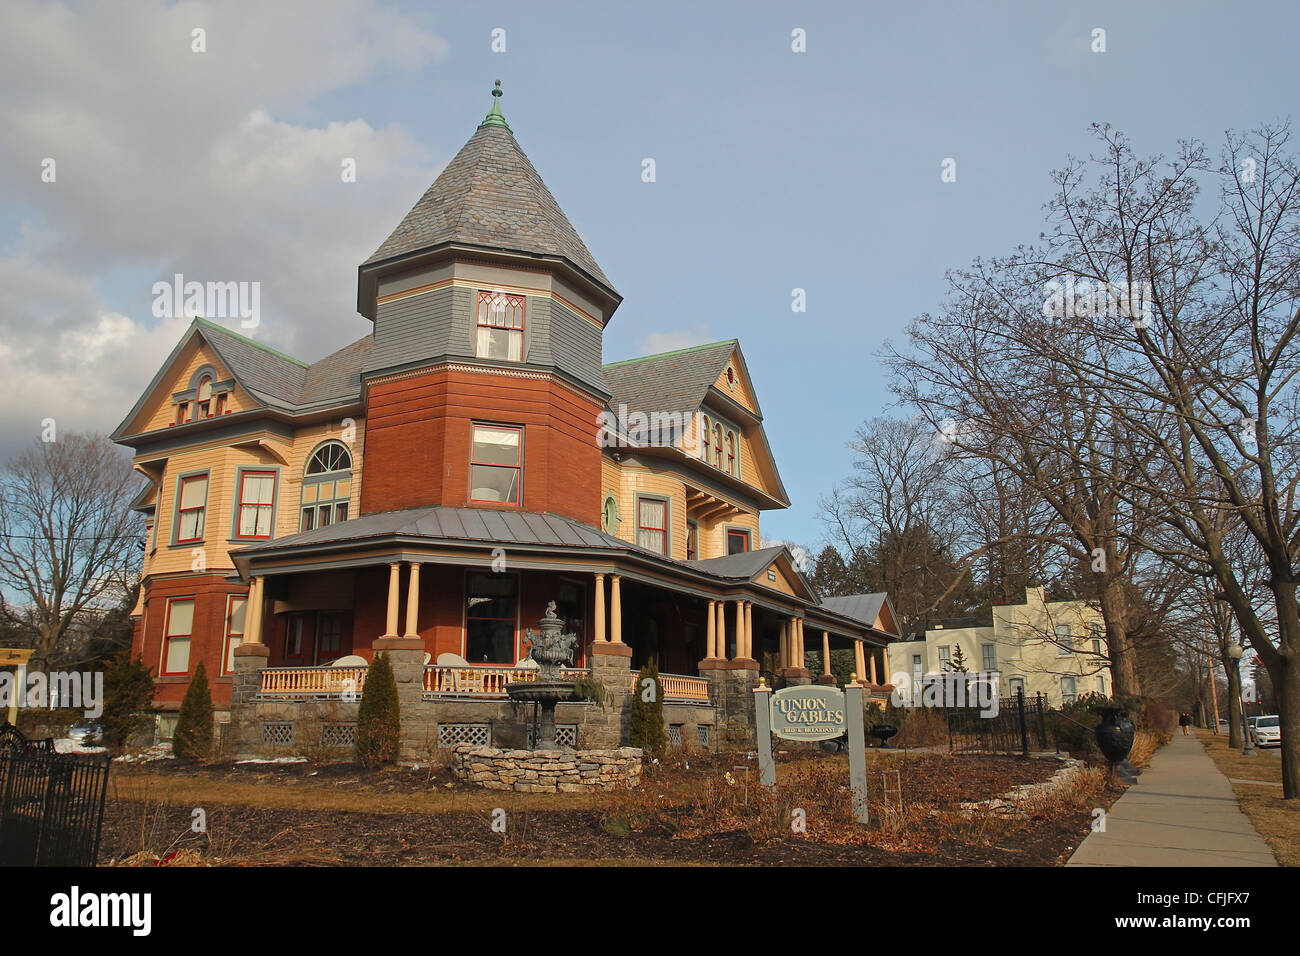 This Queen Anne Victorian built in 1901 became Union Gables Bed and Breakfast in 1992. Saratoga Springs, New York Stock Photo